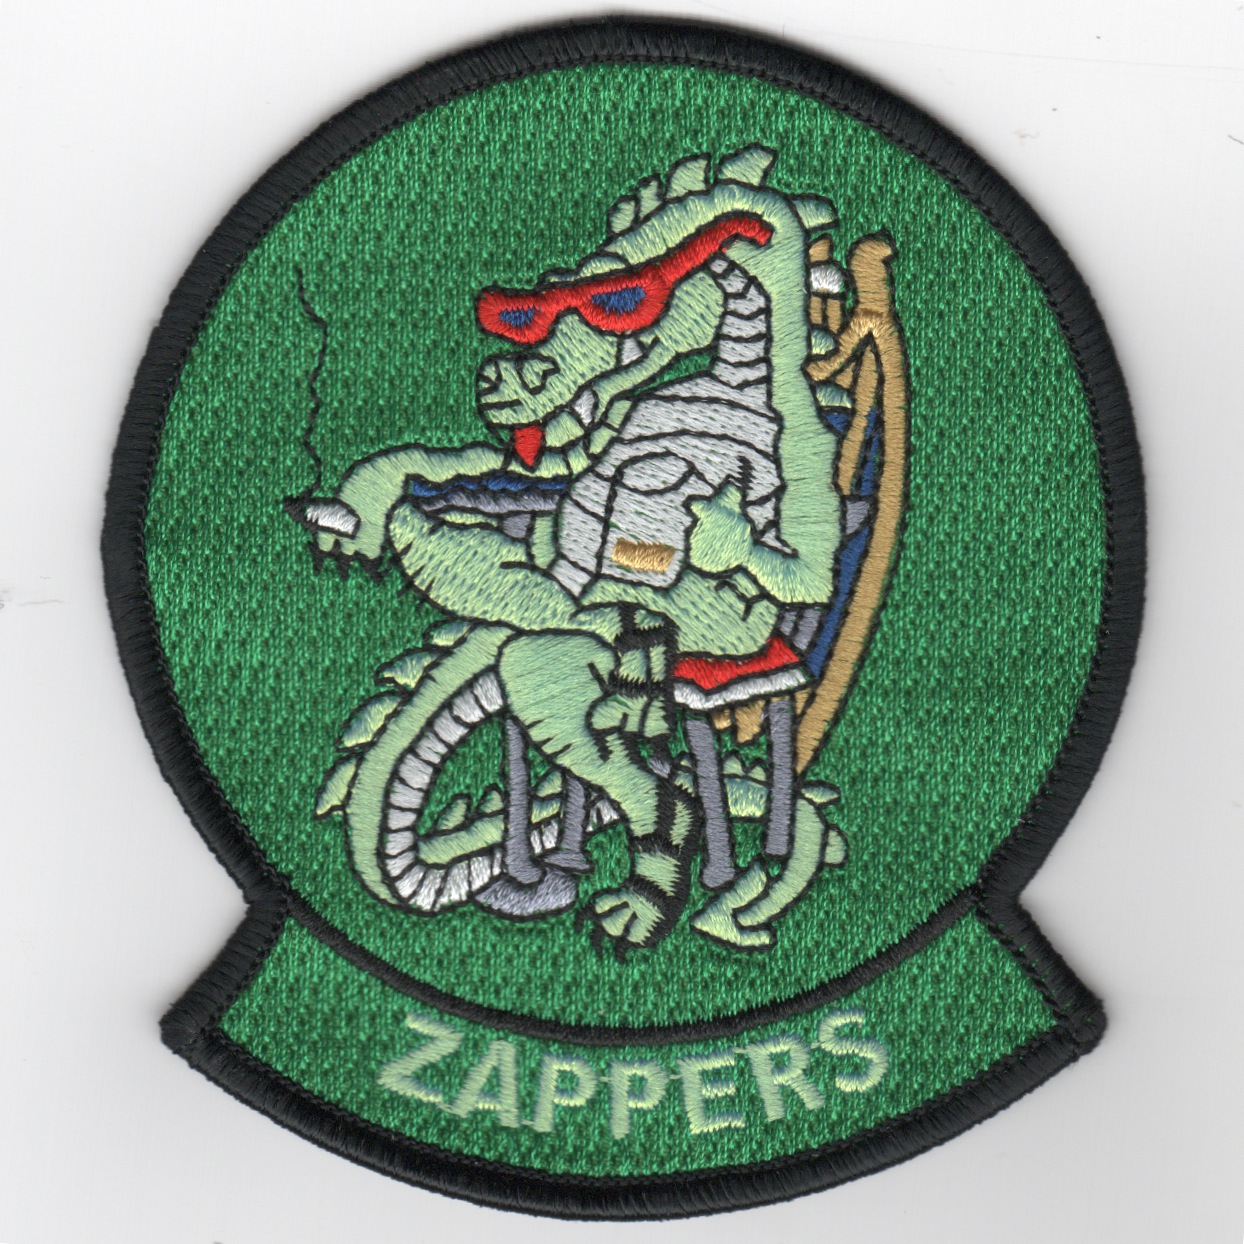 VAQ-130 'Zappers' Patch (Green/No Velcro)